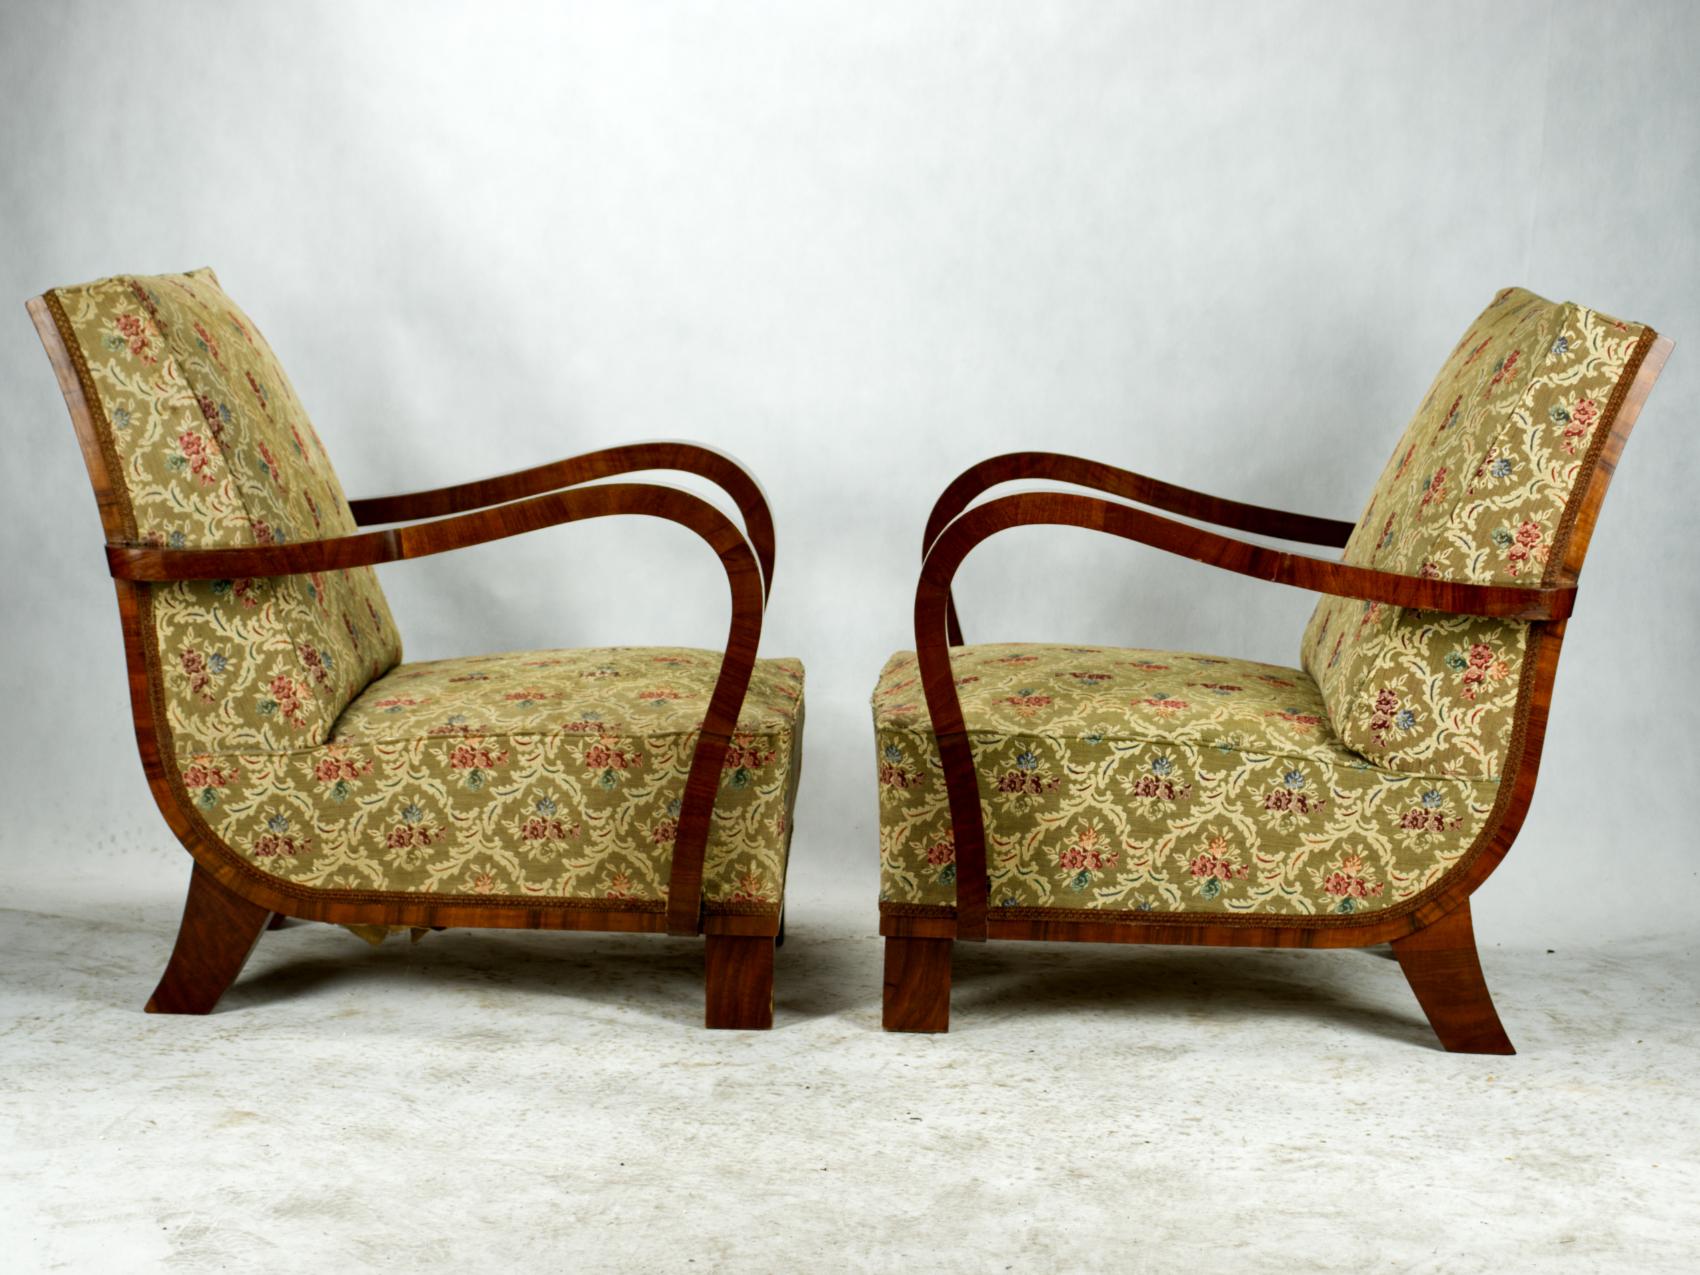 Pair of Art Deco lounge chairs in original condition, 1930s.